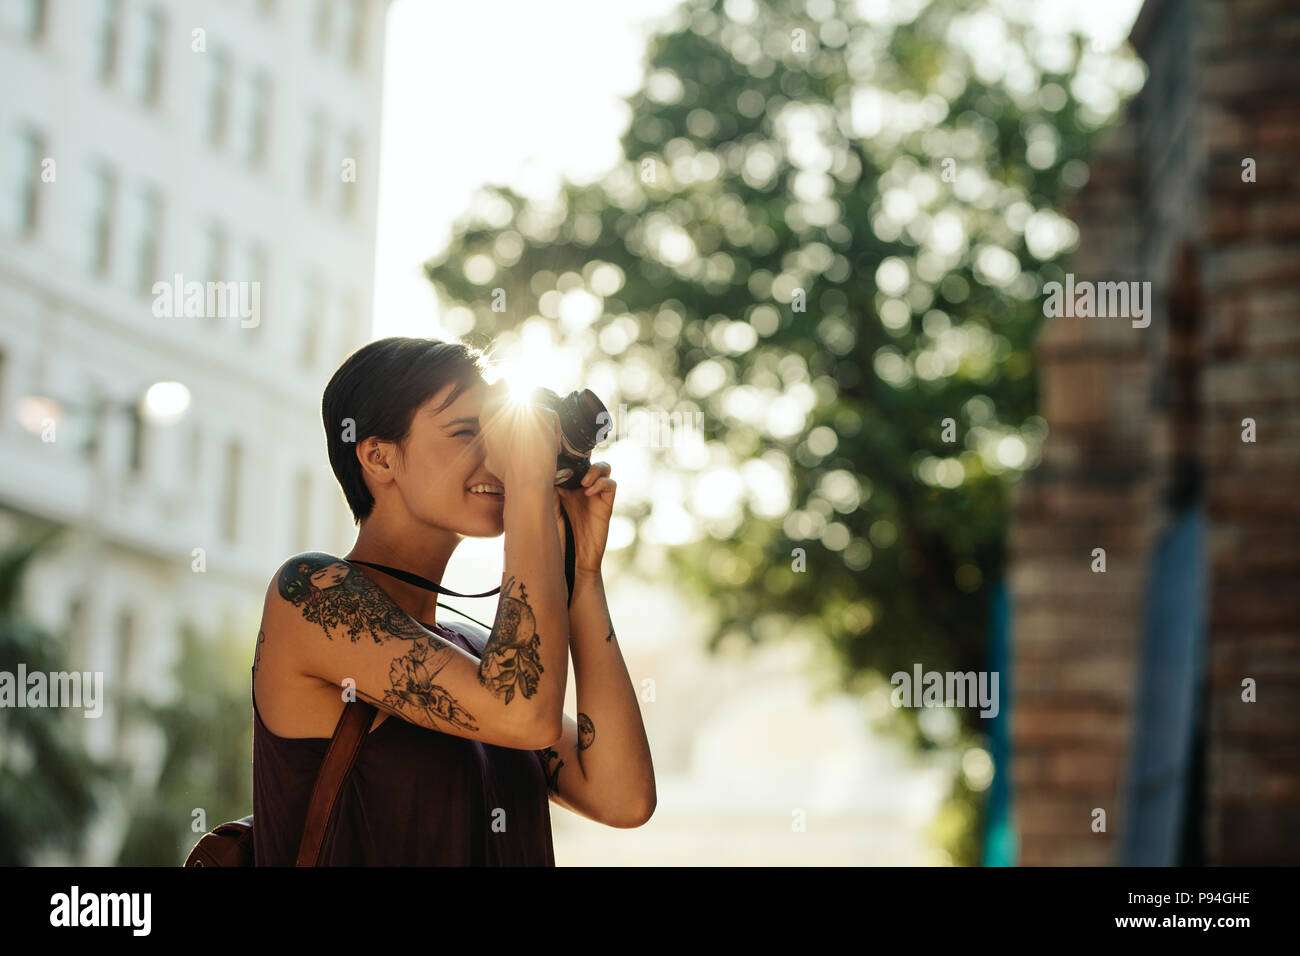 Woman traveler taking photo using her camera with sun in the background. Tourist with tattoo on her hand going around the city taking photographs. Stock Photo